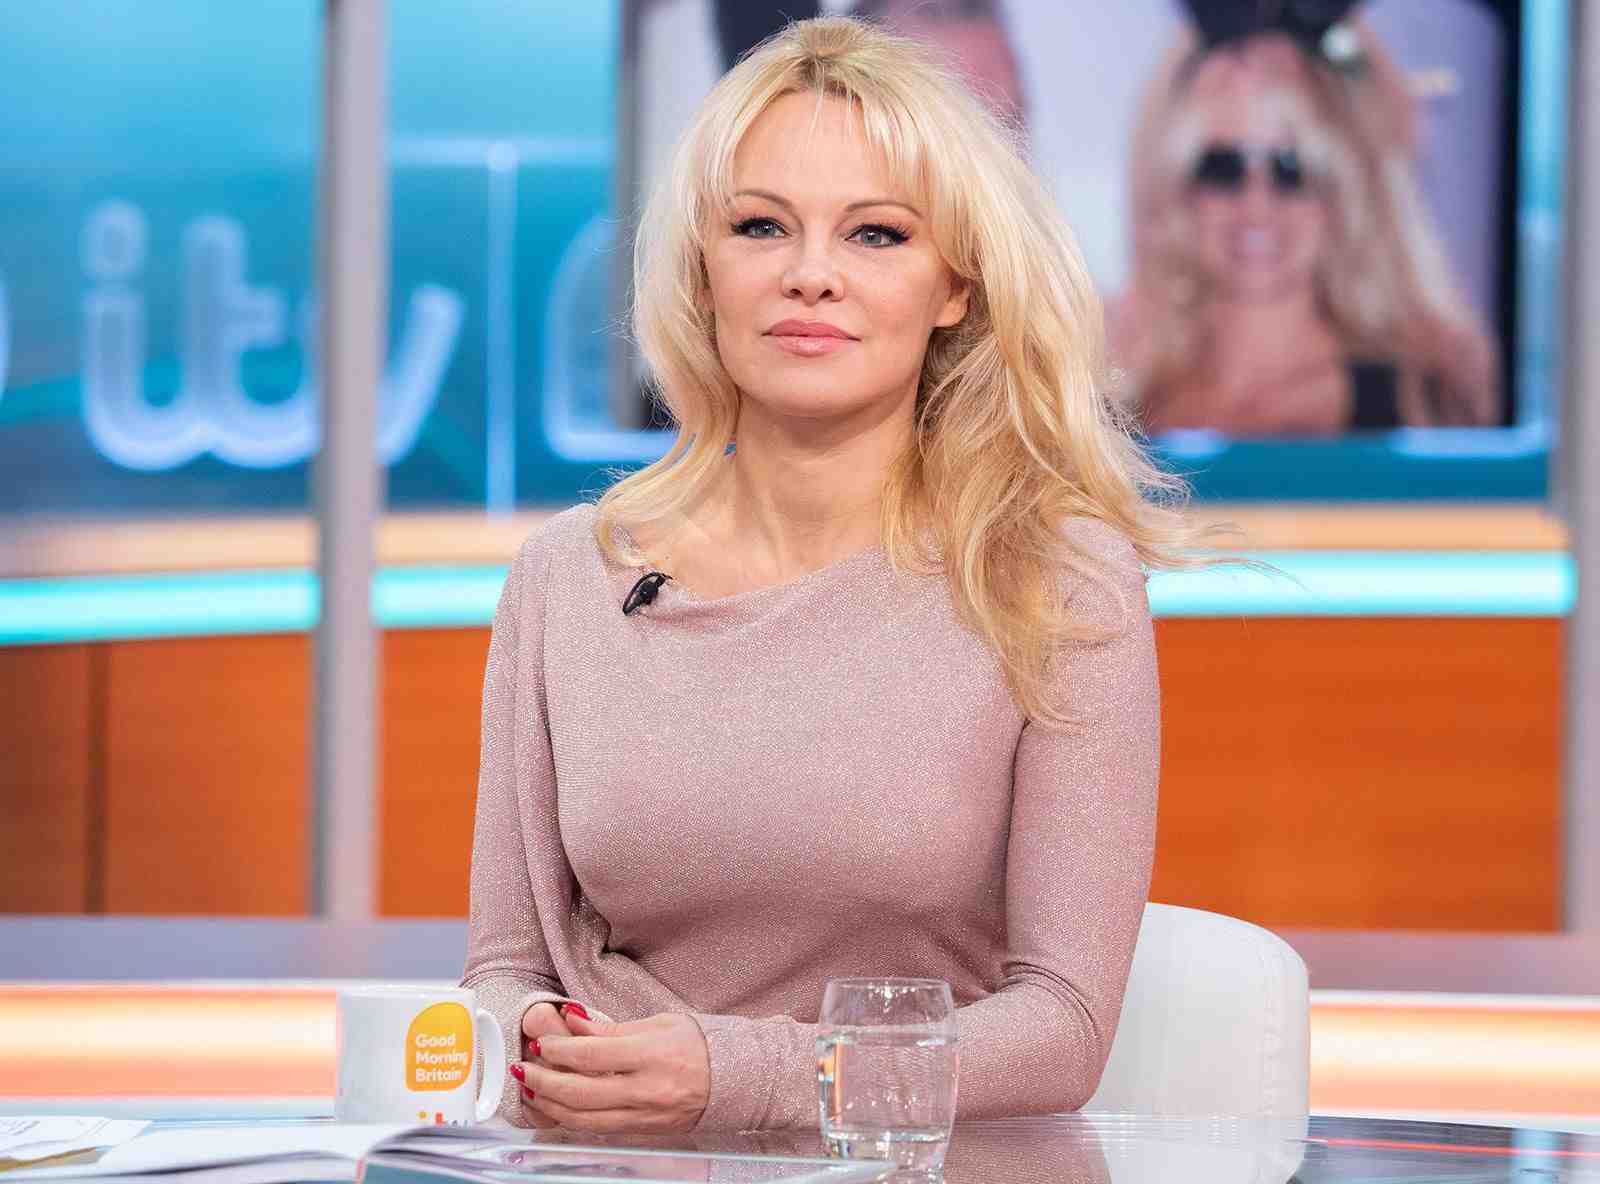 Unmask Pamela Anderson's net worth shocker! Glitter, glamour, and beach sands might blur the sober reality of an icon's pocketbook. Prep for a fiscal deep dive!